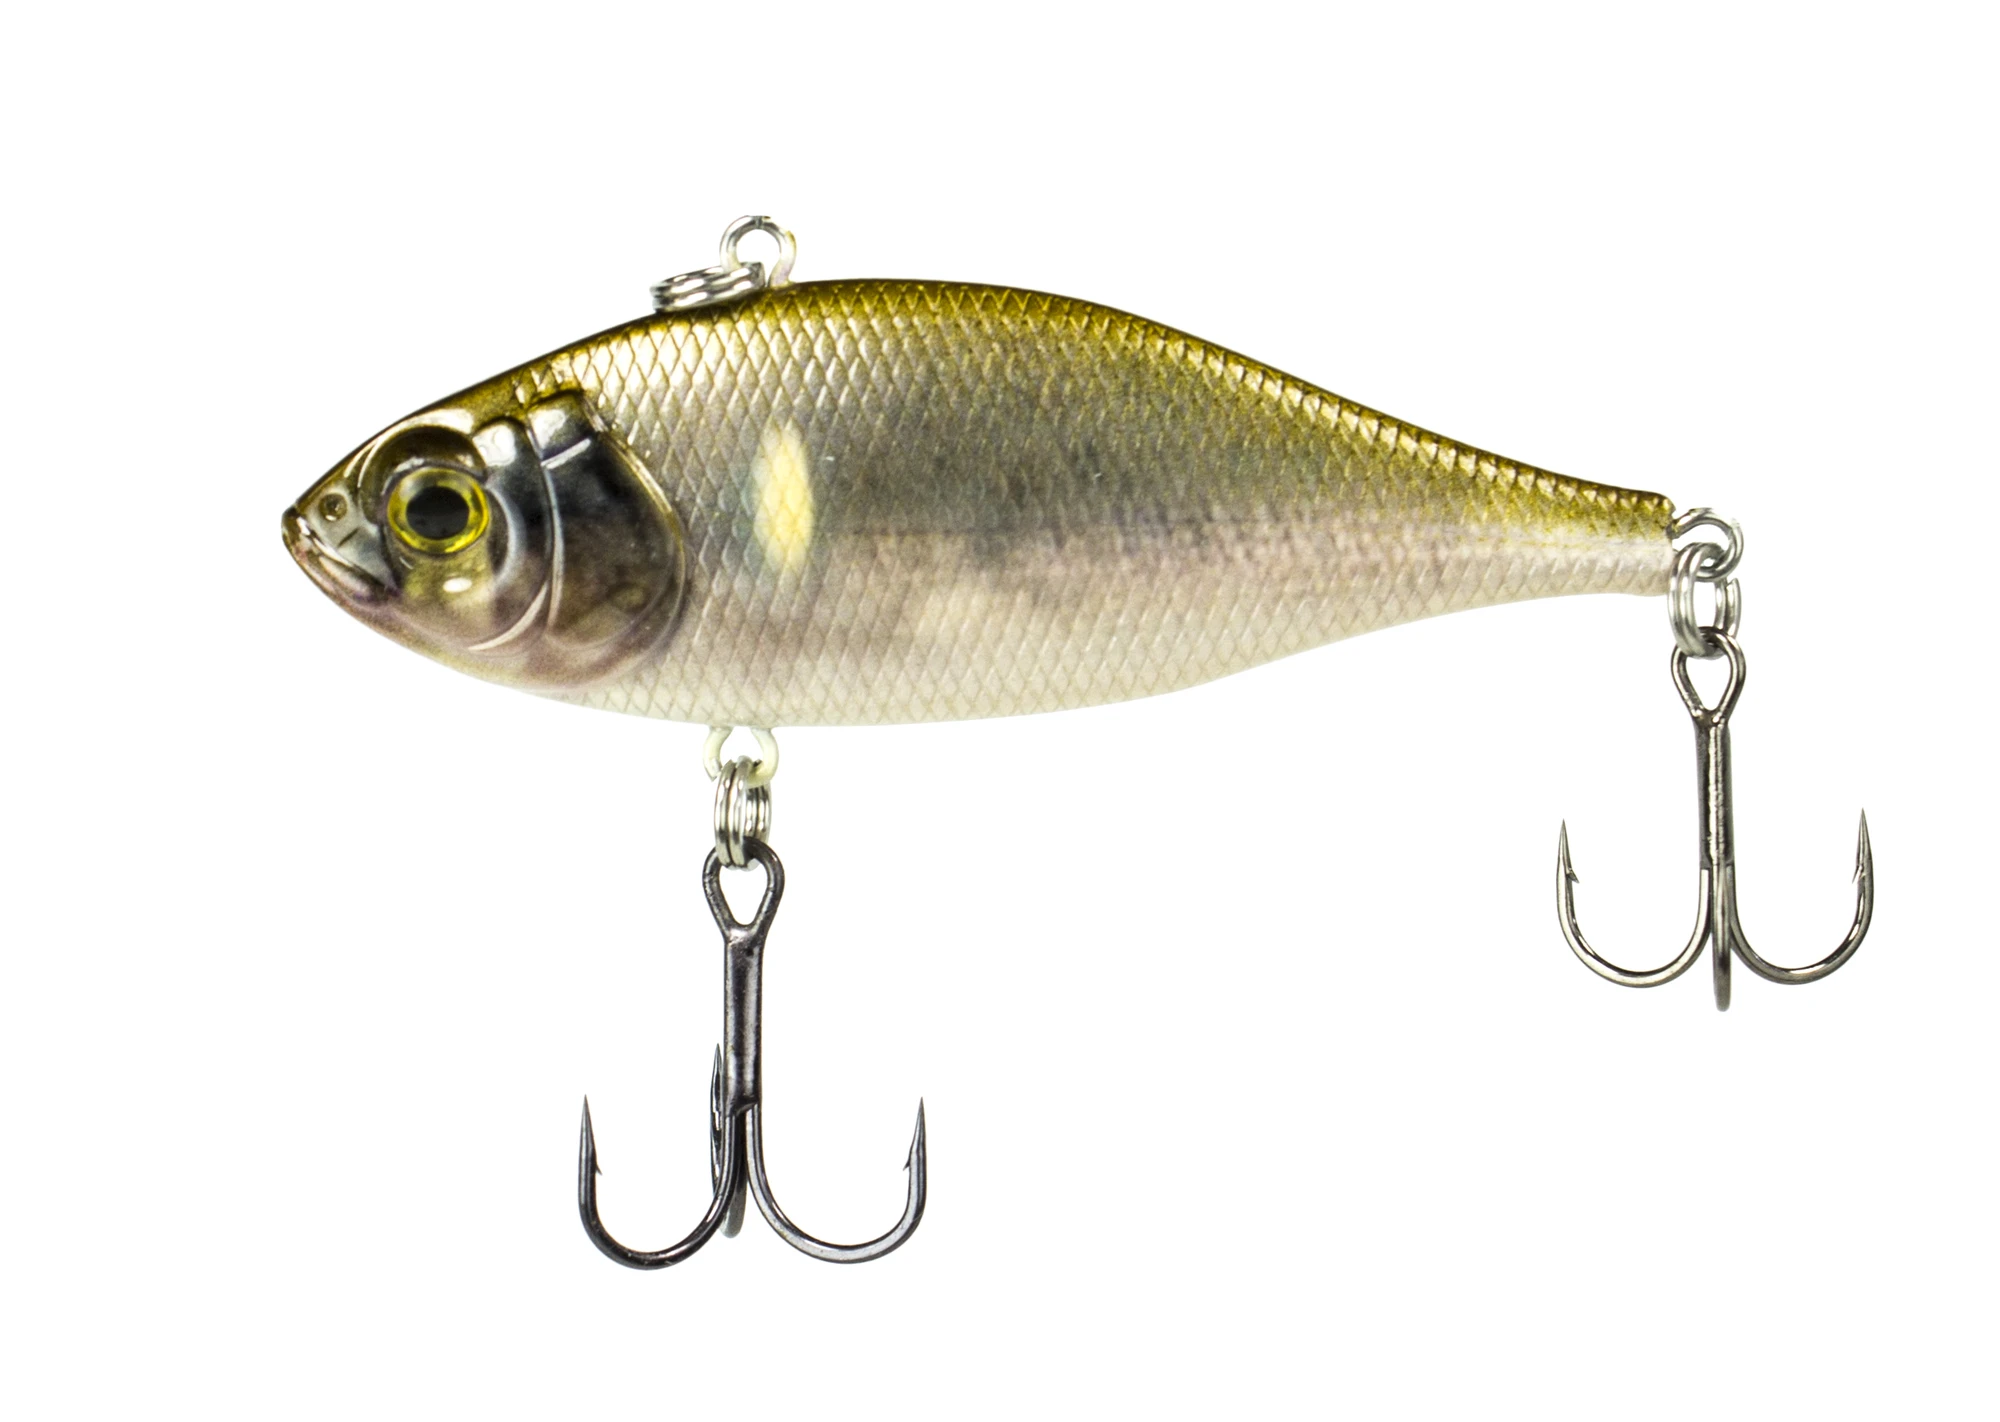 BULLBAIT 3 1/3" Floating 0 to 5 feet Crankbait Lure in Color#20 for Bass/Walleye 